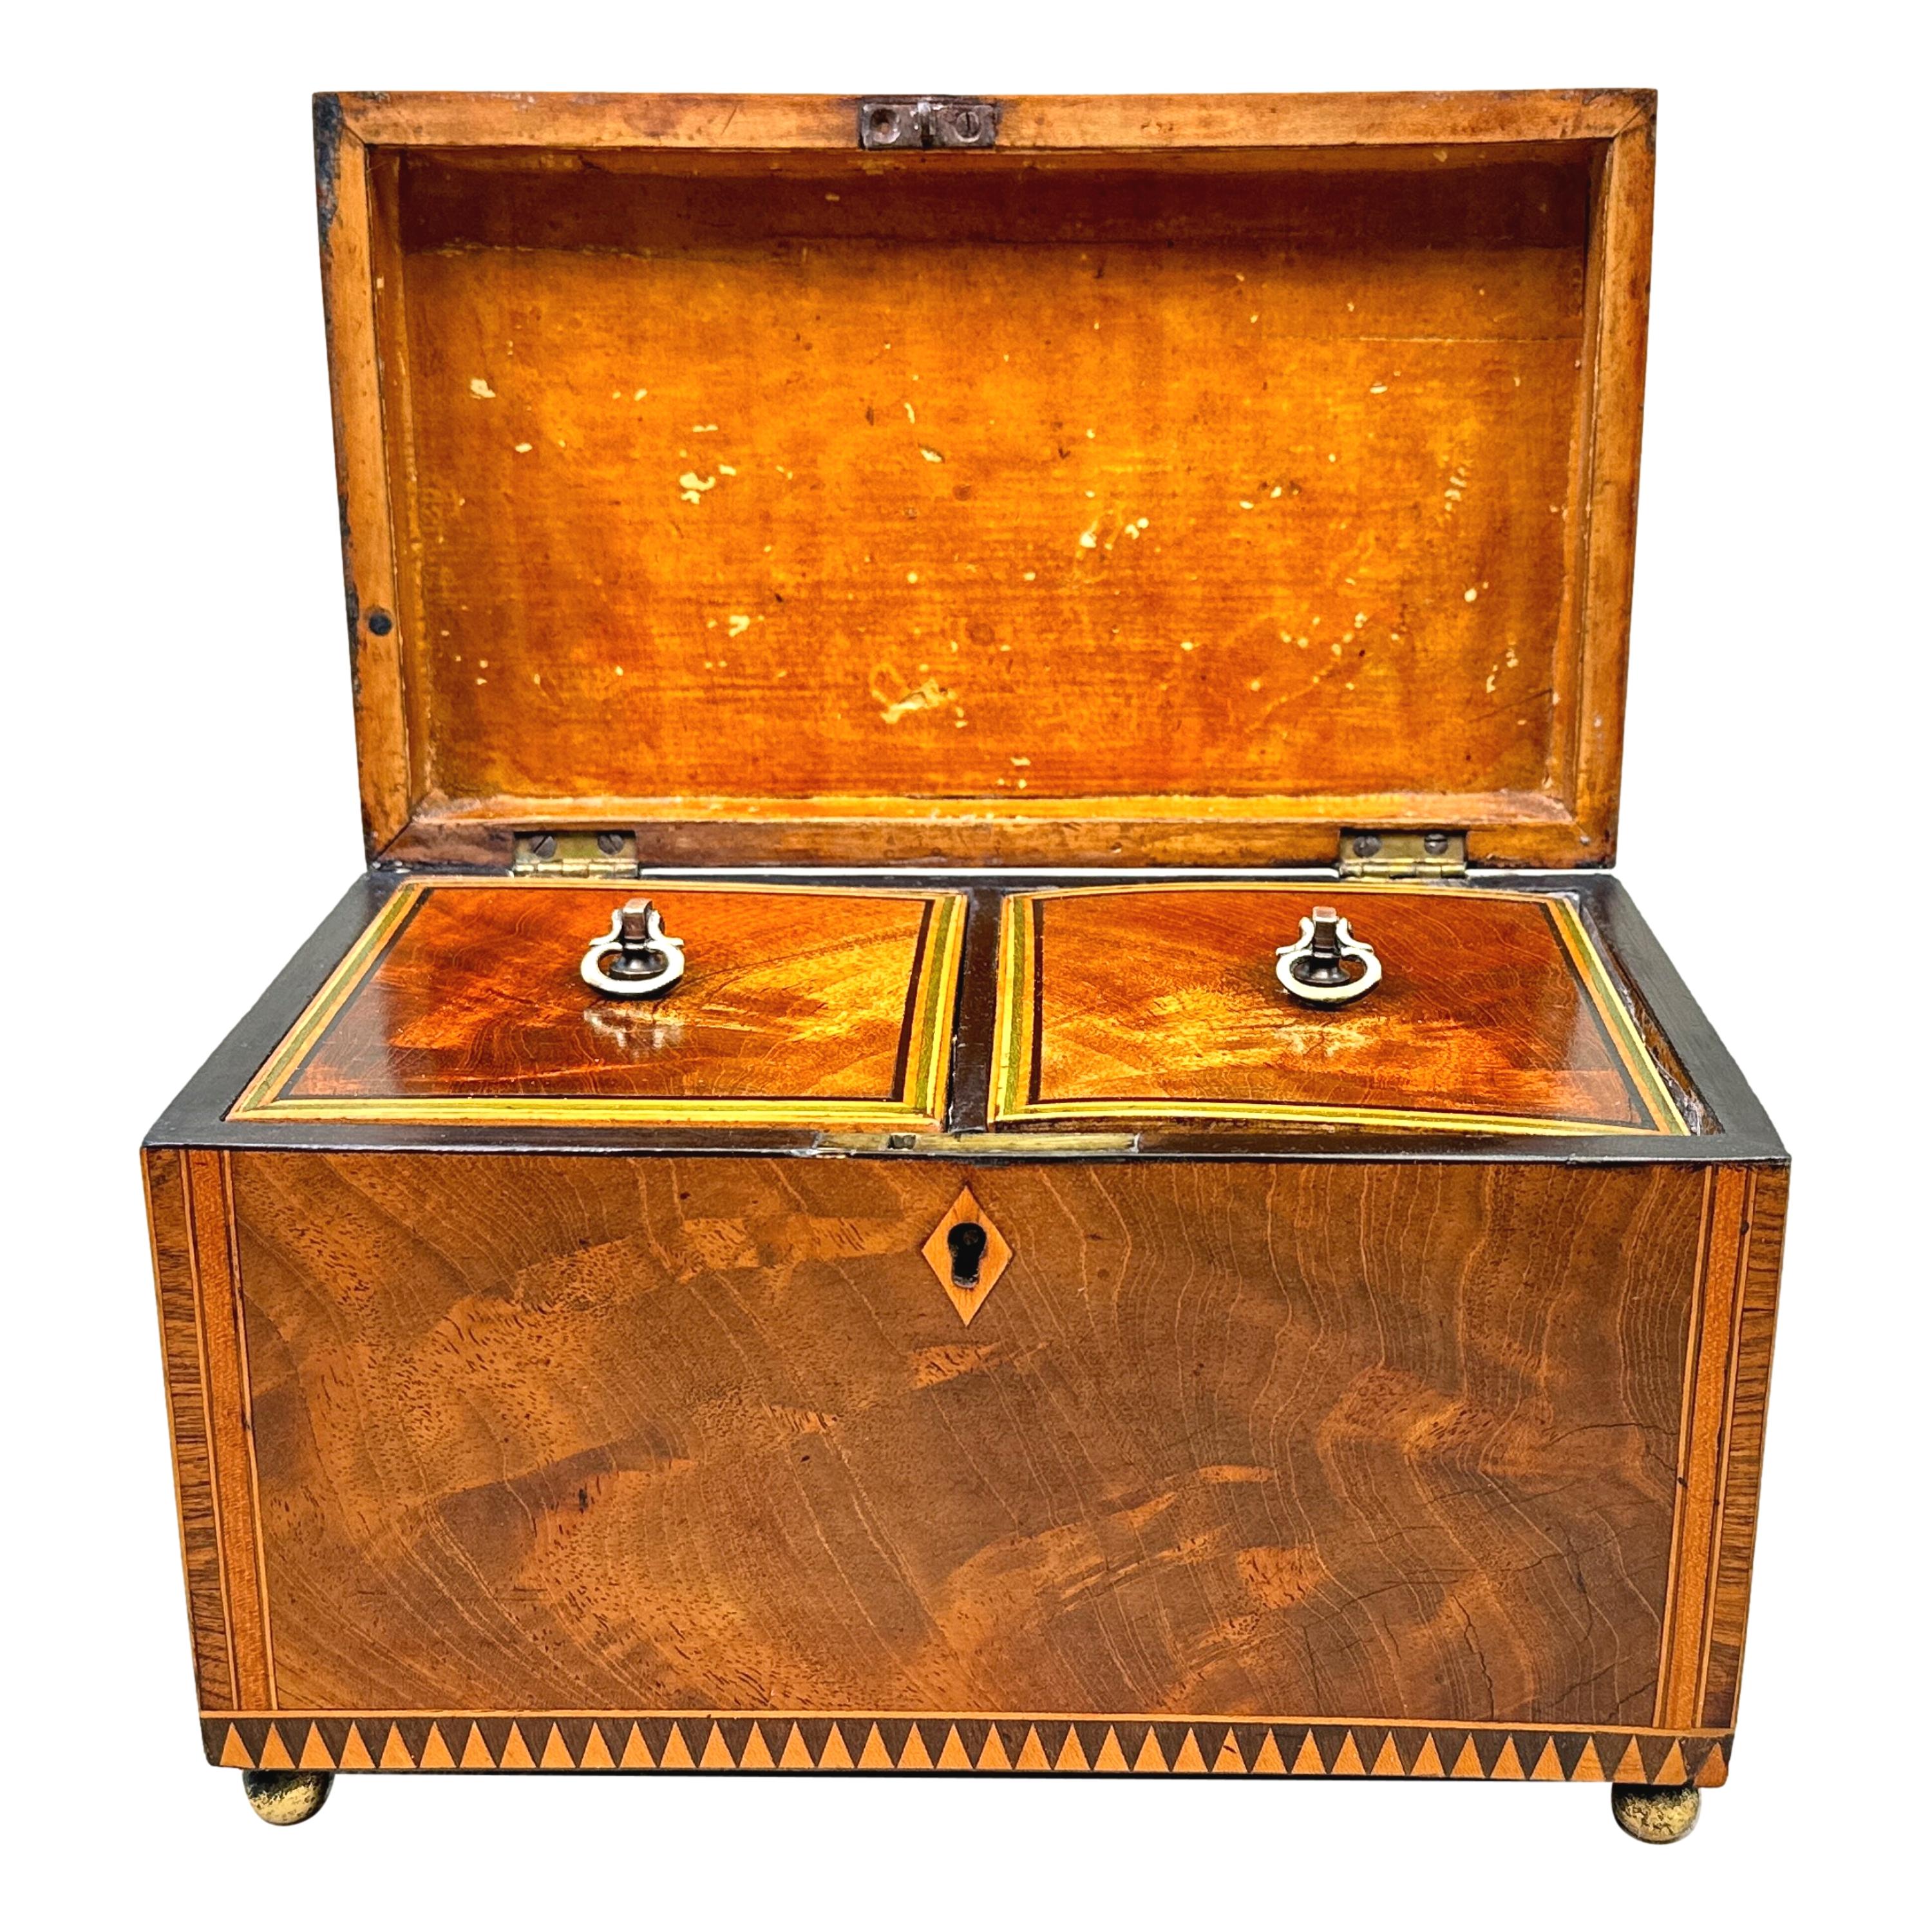 Georgian 18th Century Mahogany Rectangular Tea Caddy In Good Condition For Sale In Bedfordshire, GB